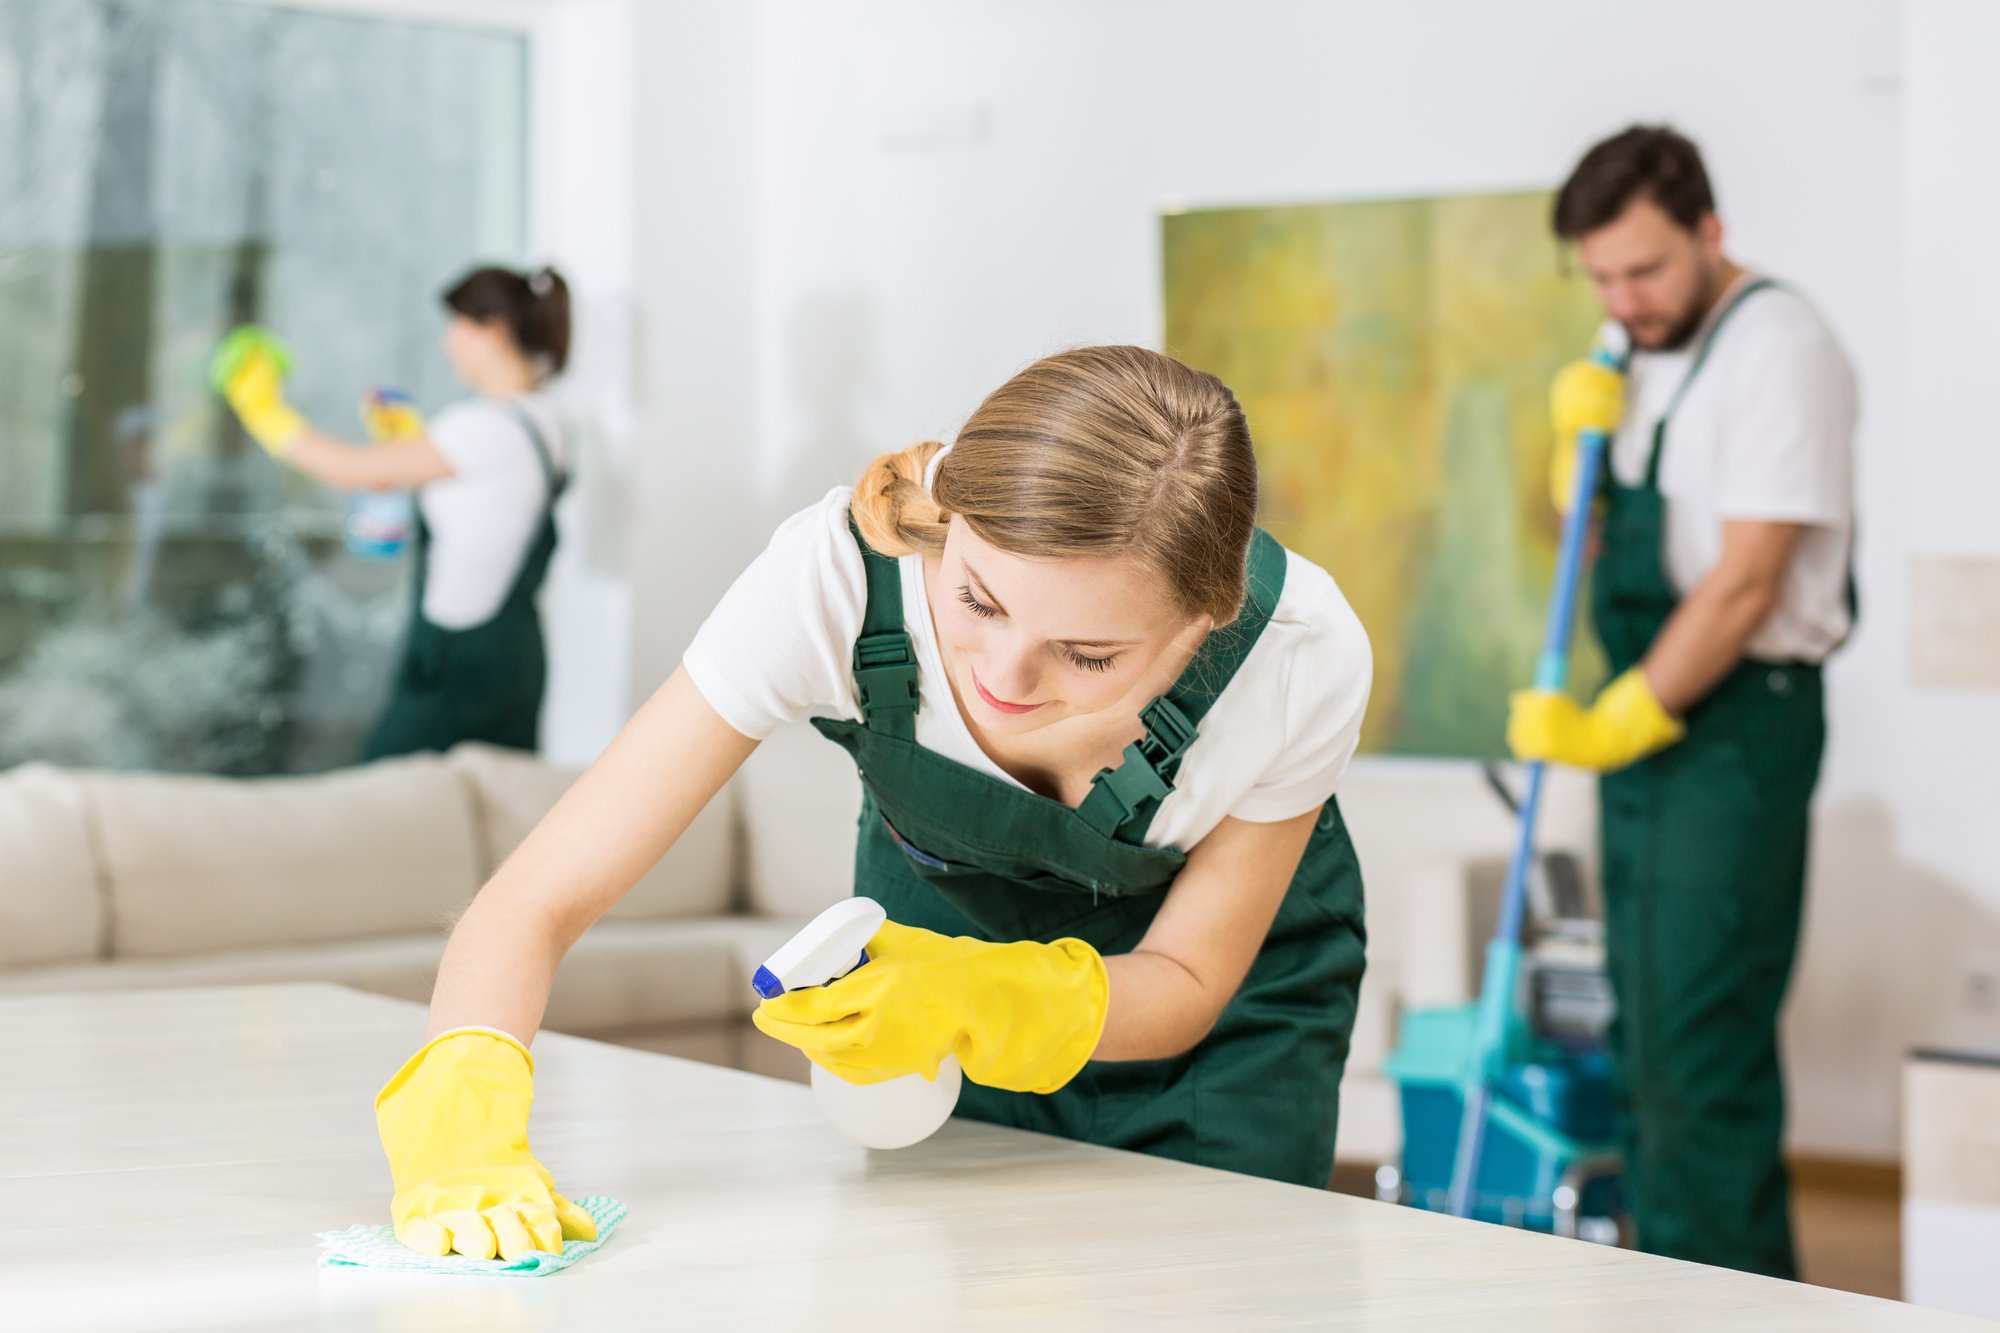 Don't have time to clean your house? No problem. Learn the benefits of recurring cleaning services by reading this guide.